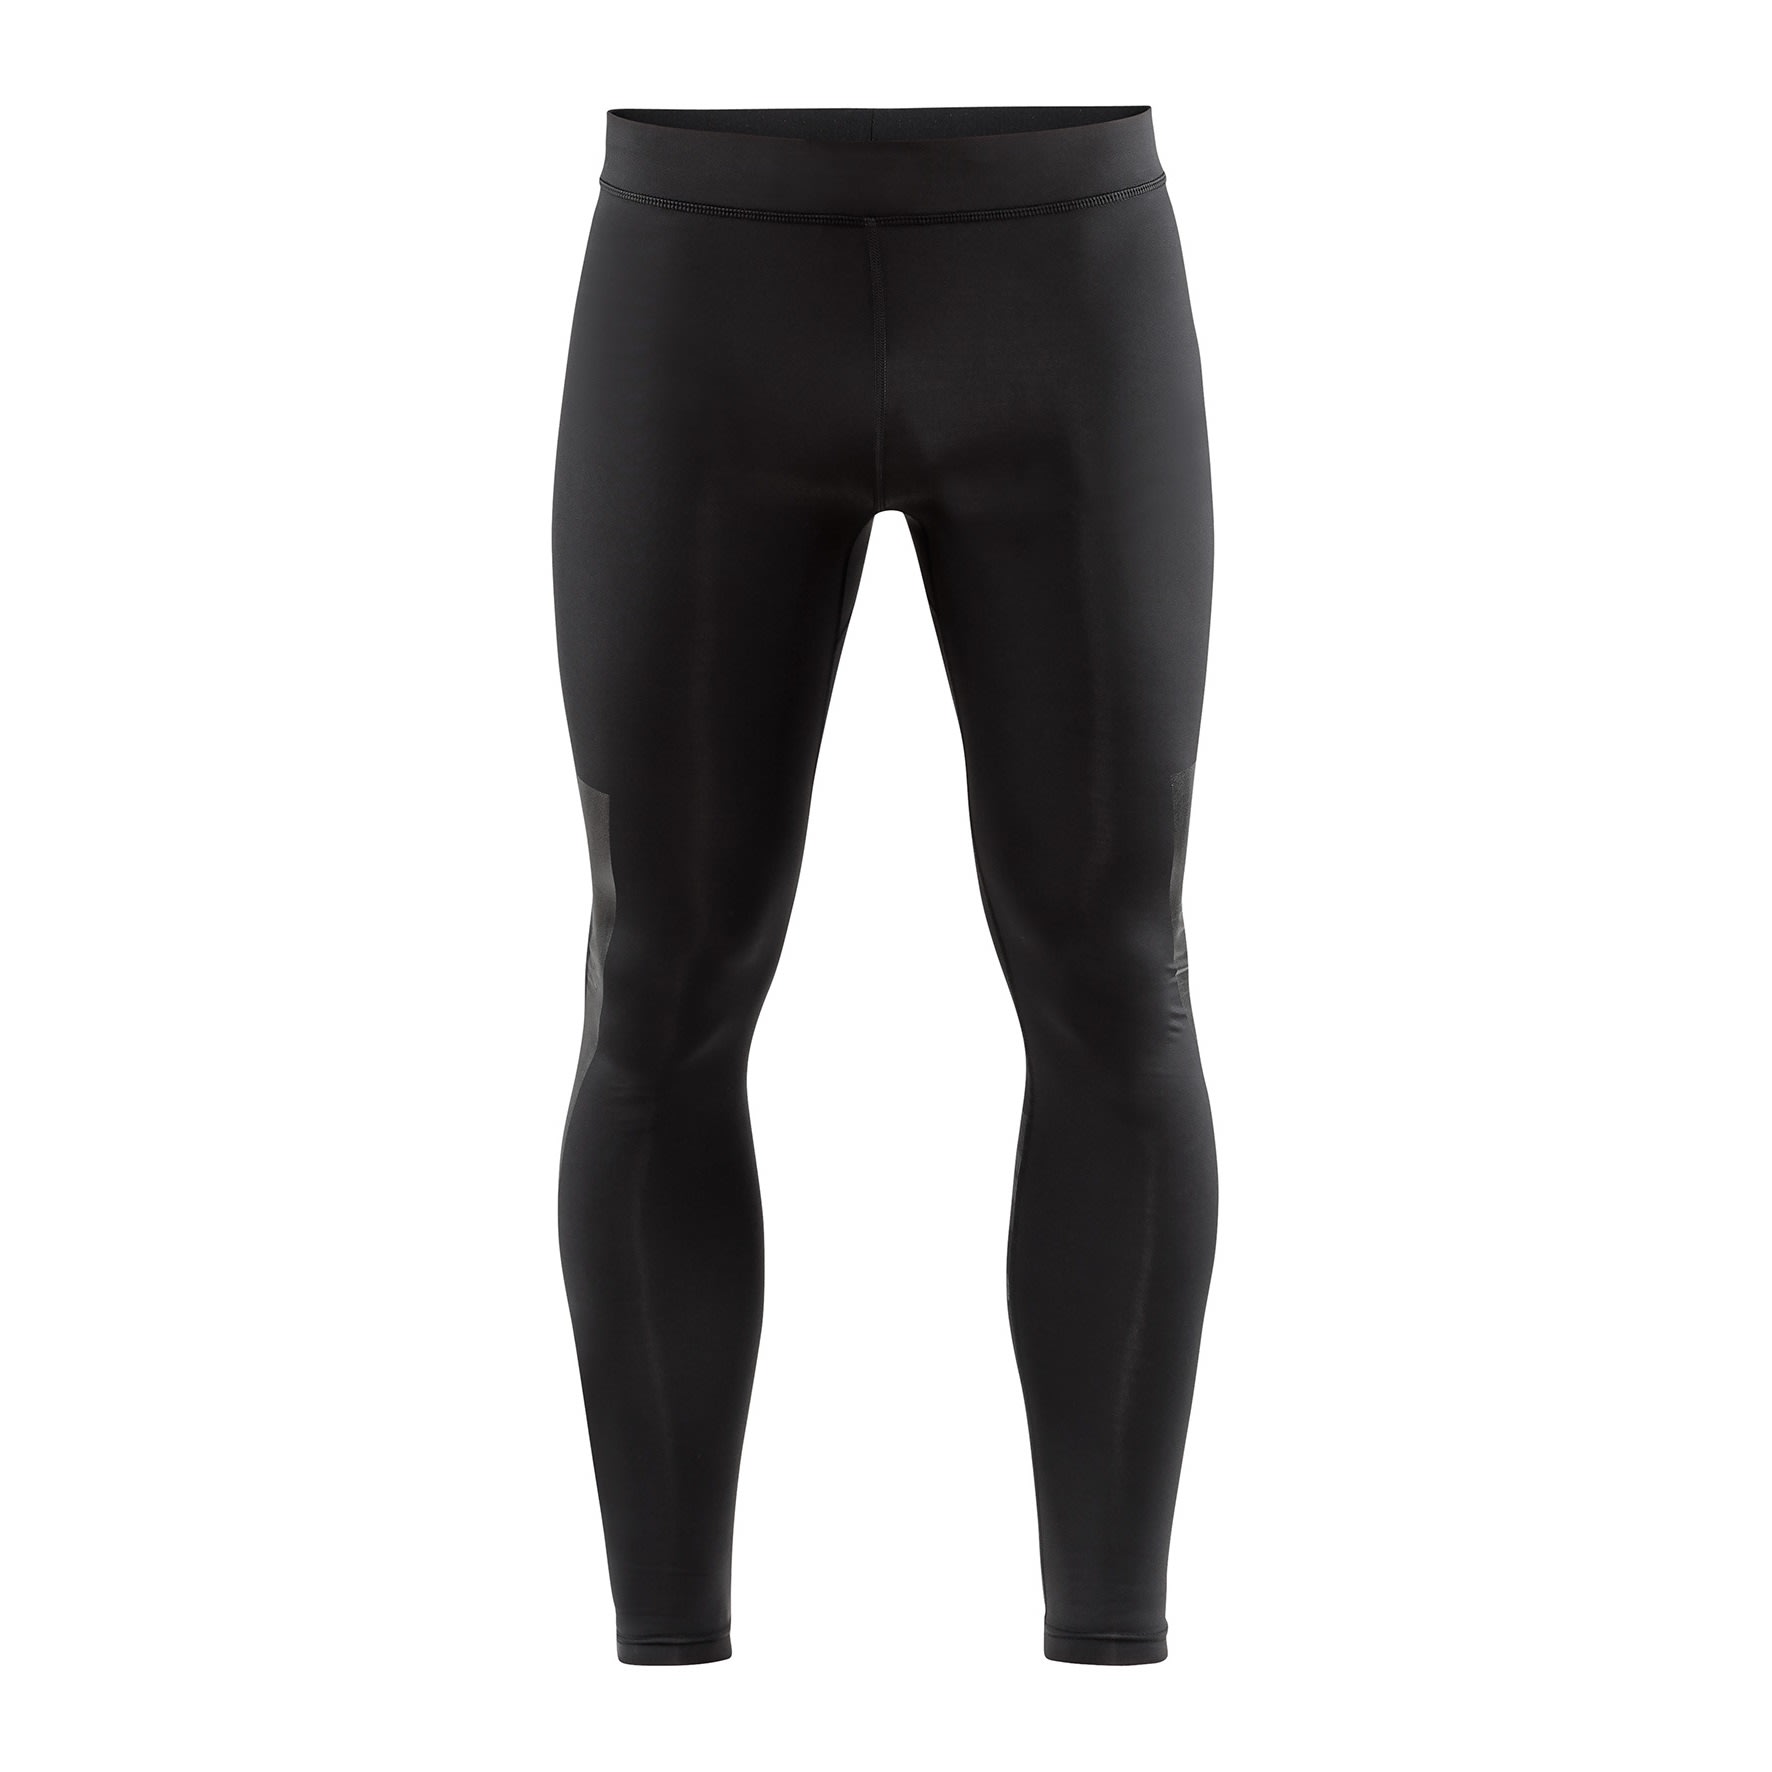 Buy Craft Men's Urban Run Tights from Outnorth